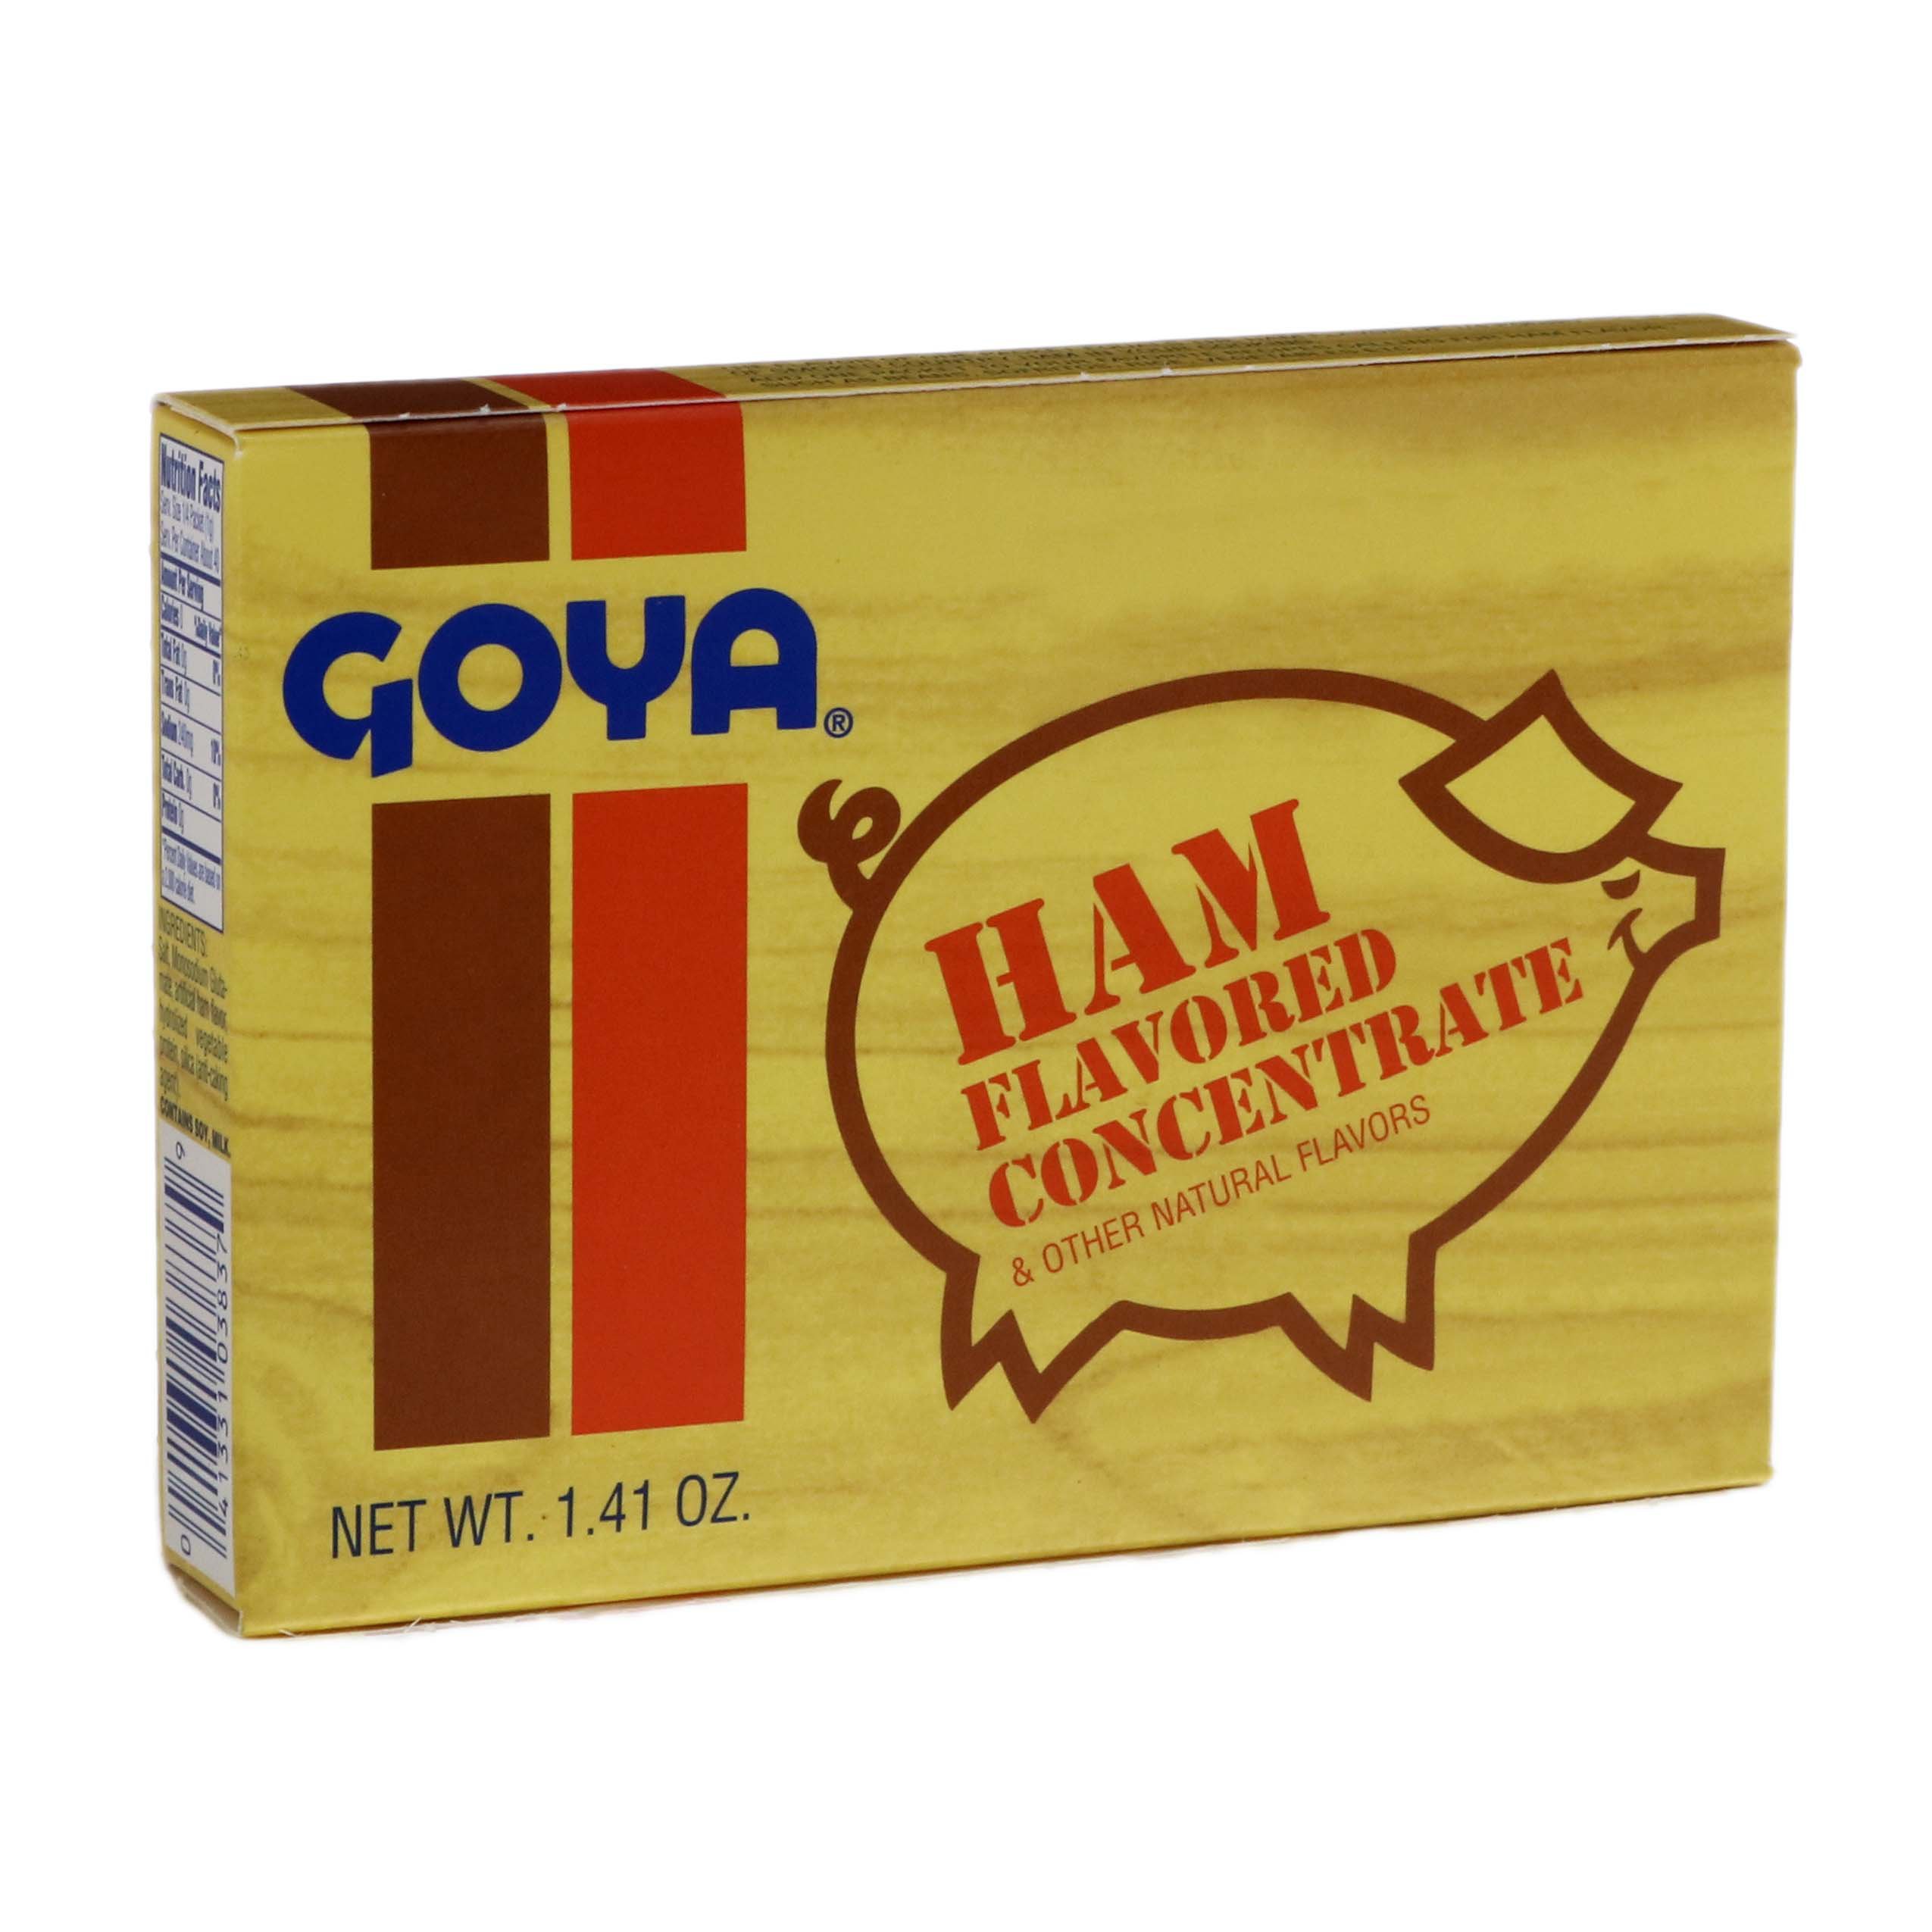  Goya Foods Ham Flavored Concentrate, Reduced Sodium